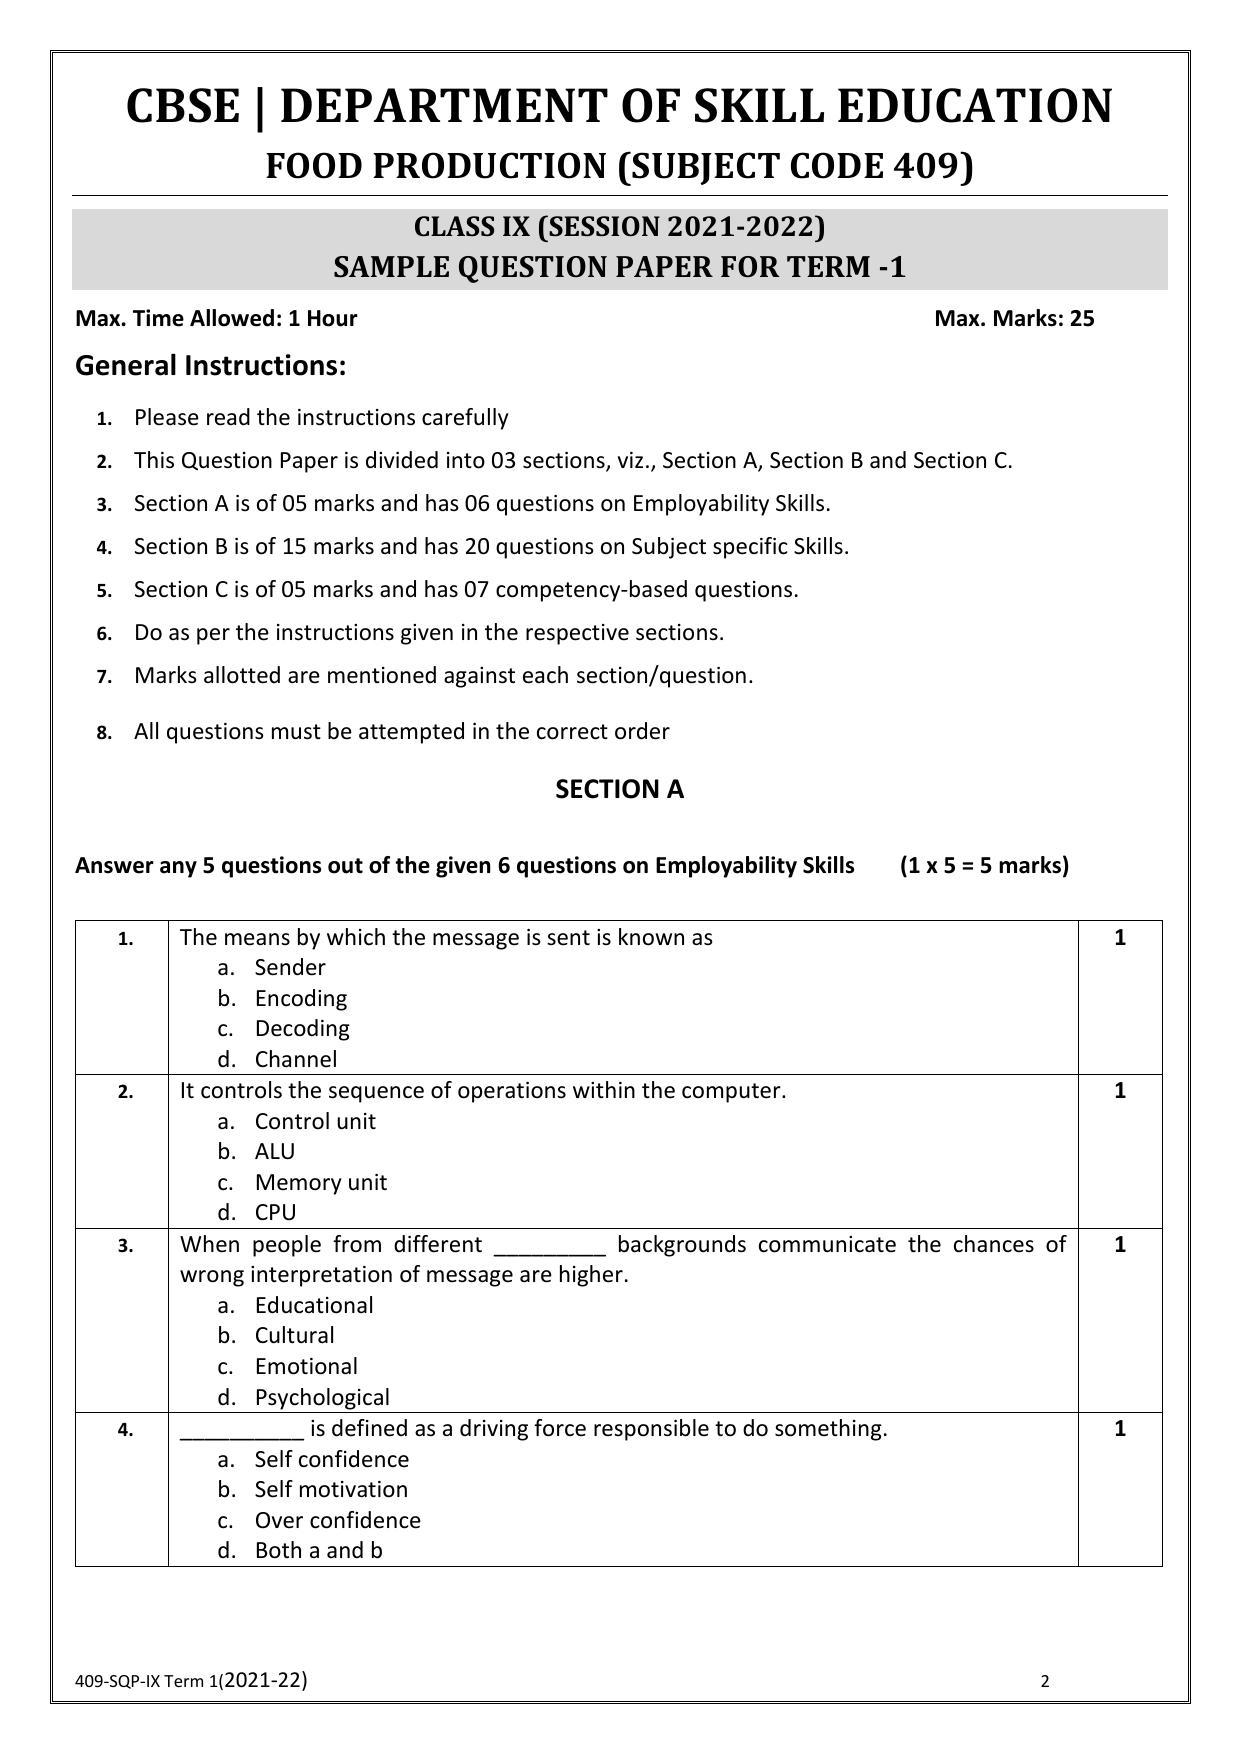 CBSE Class 10 Skill Education (Term I) - Food Production Sample Paper 2021-22 - Page 2